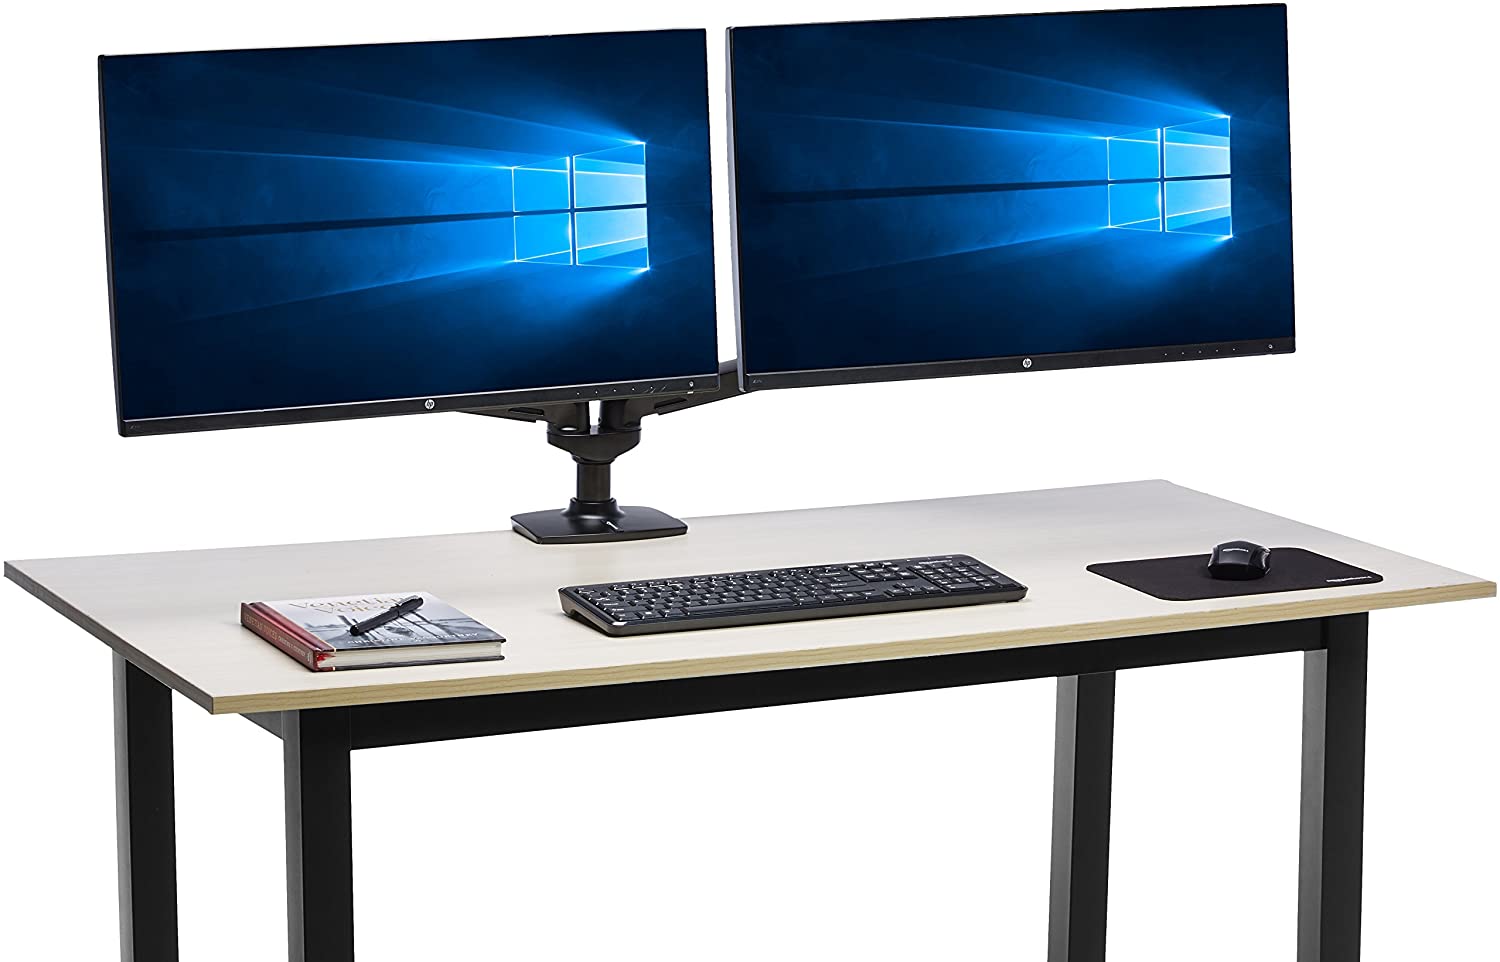 Best Gifts for Tech people - A monitor Stand